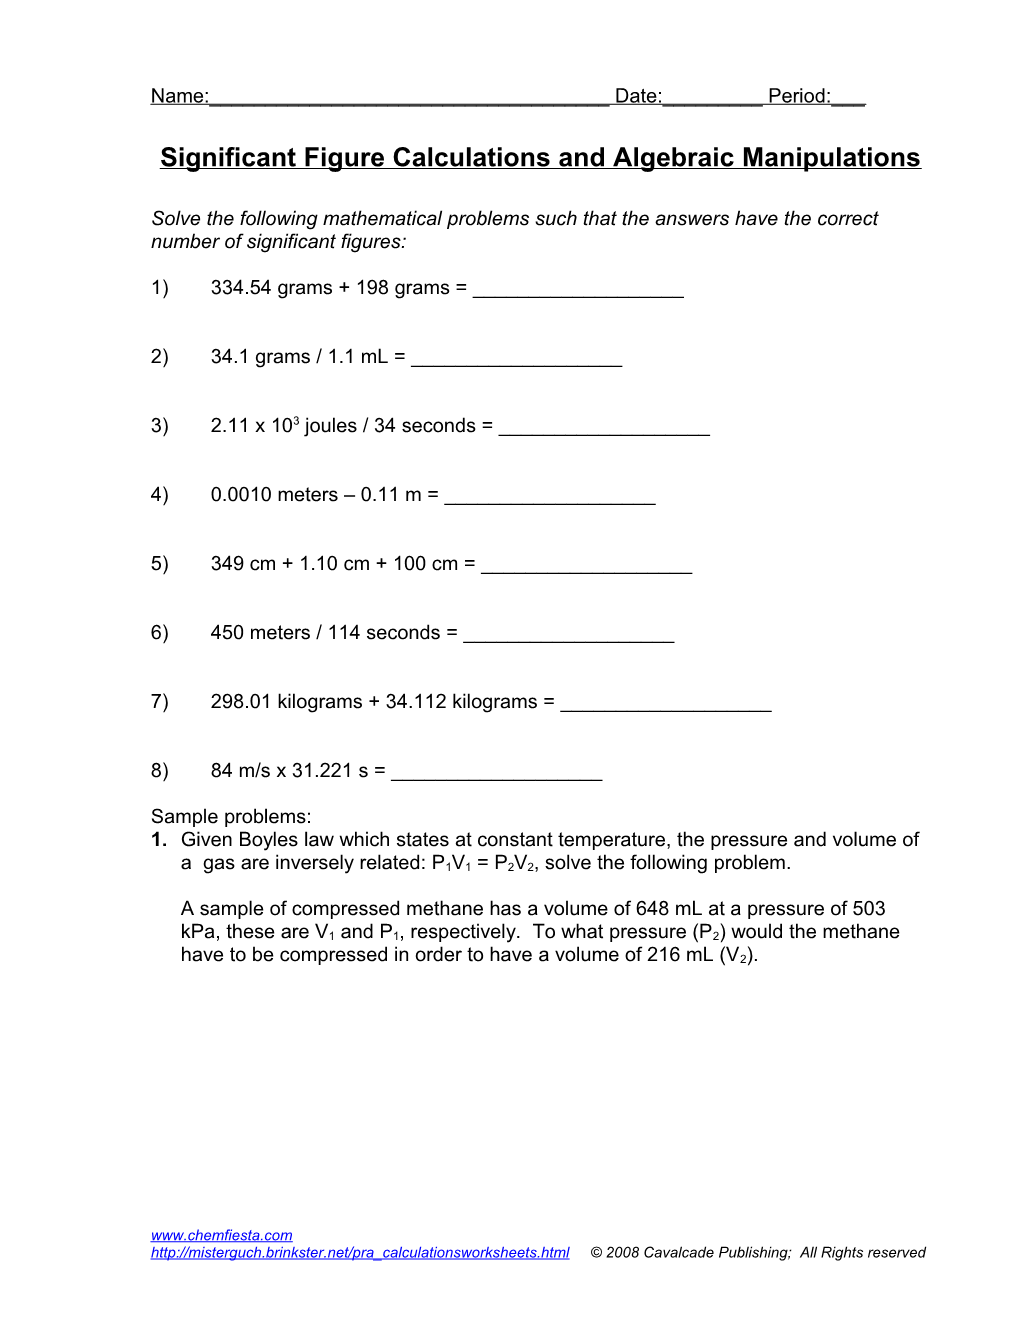 Significant Figure Calculations s1